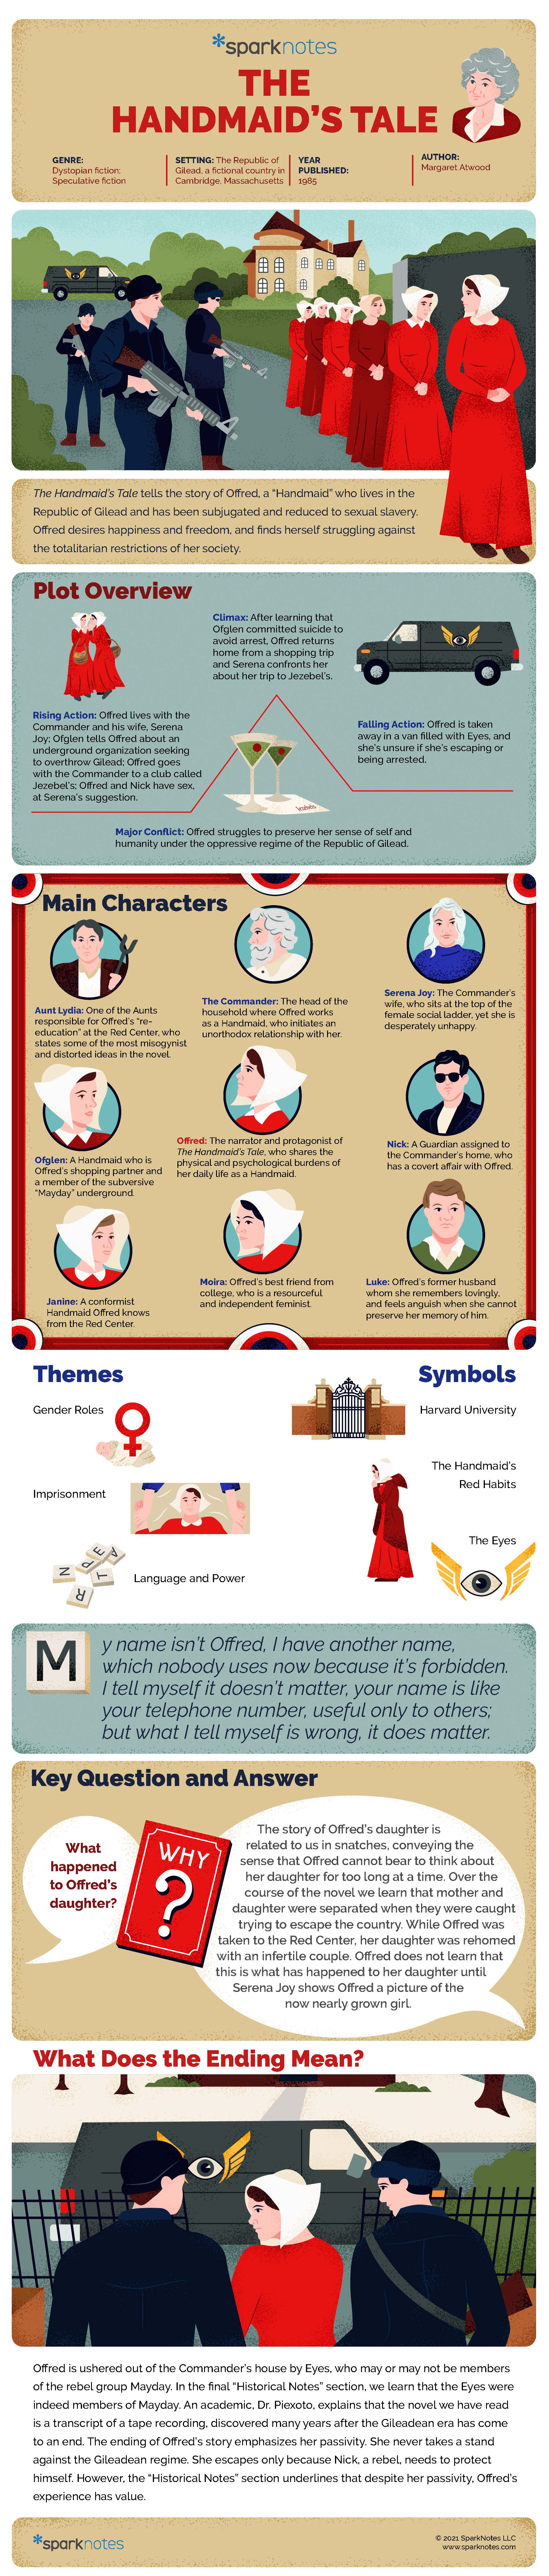 The Handmaid's Tale Infographic SparkNotes